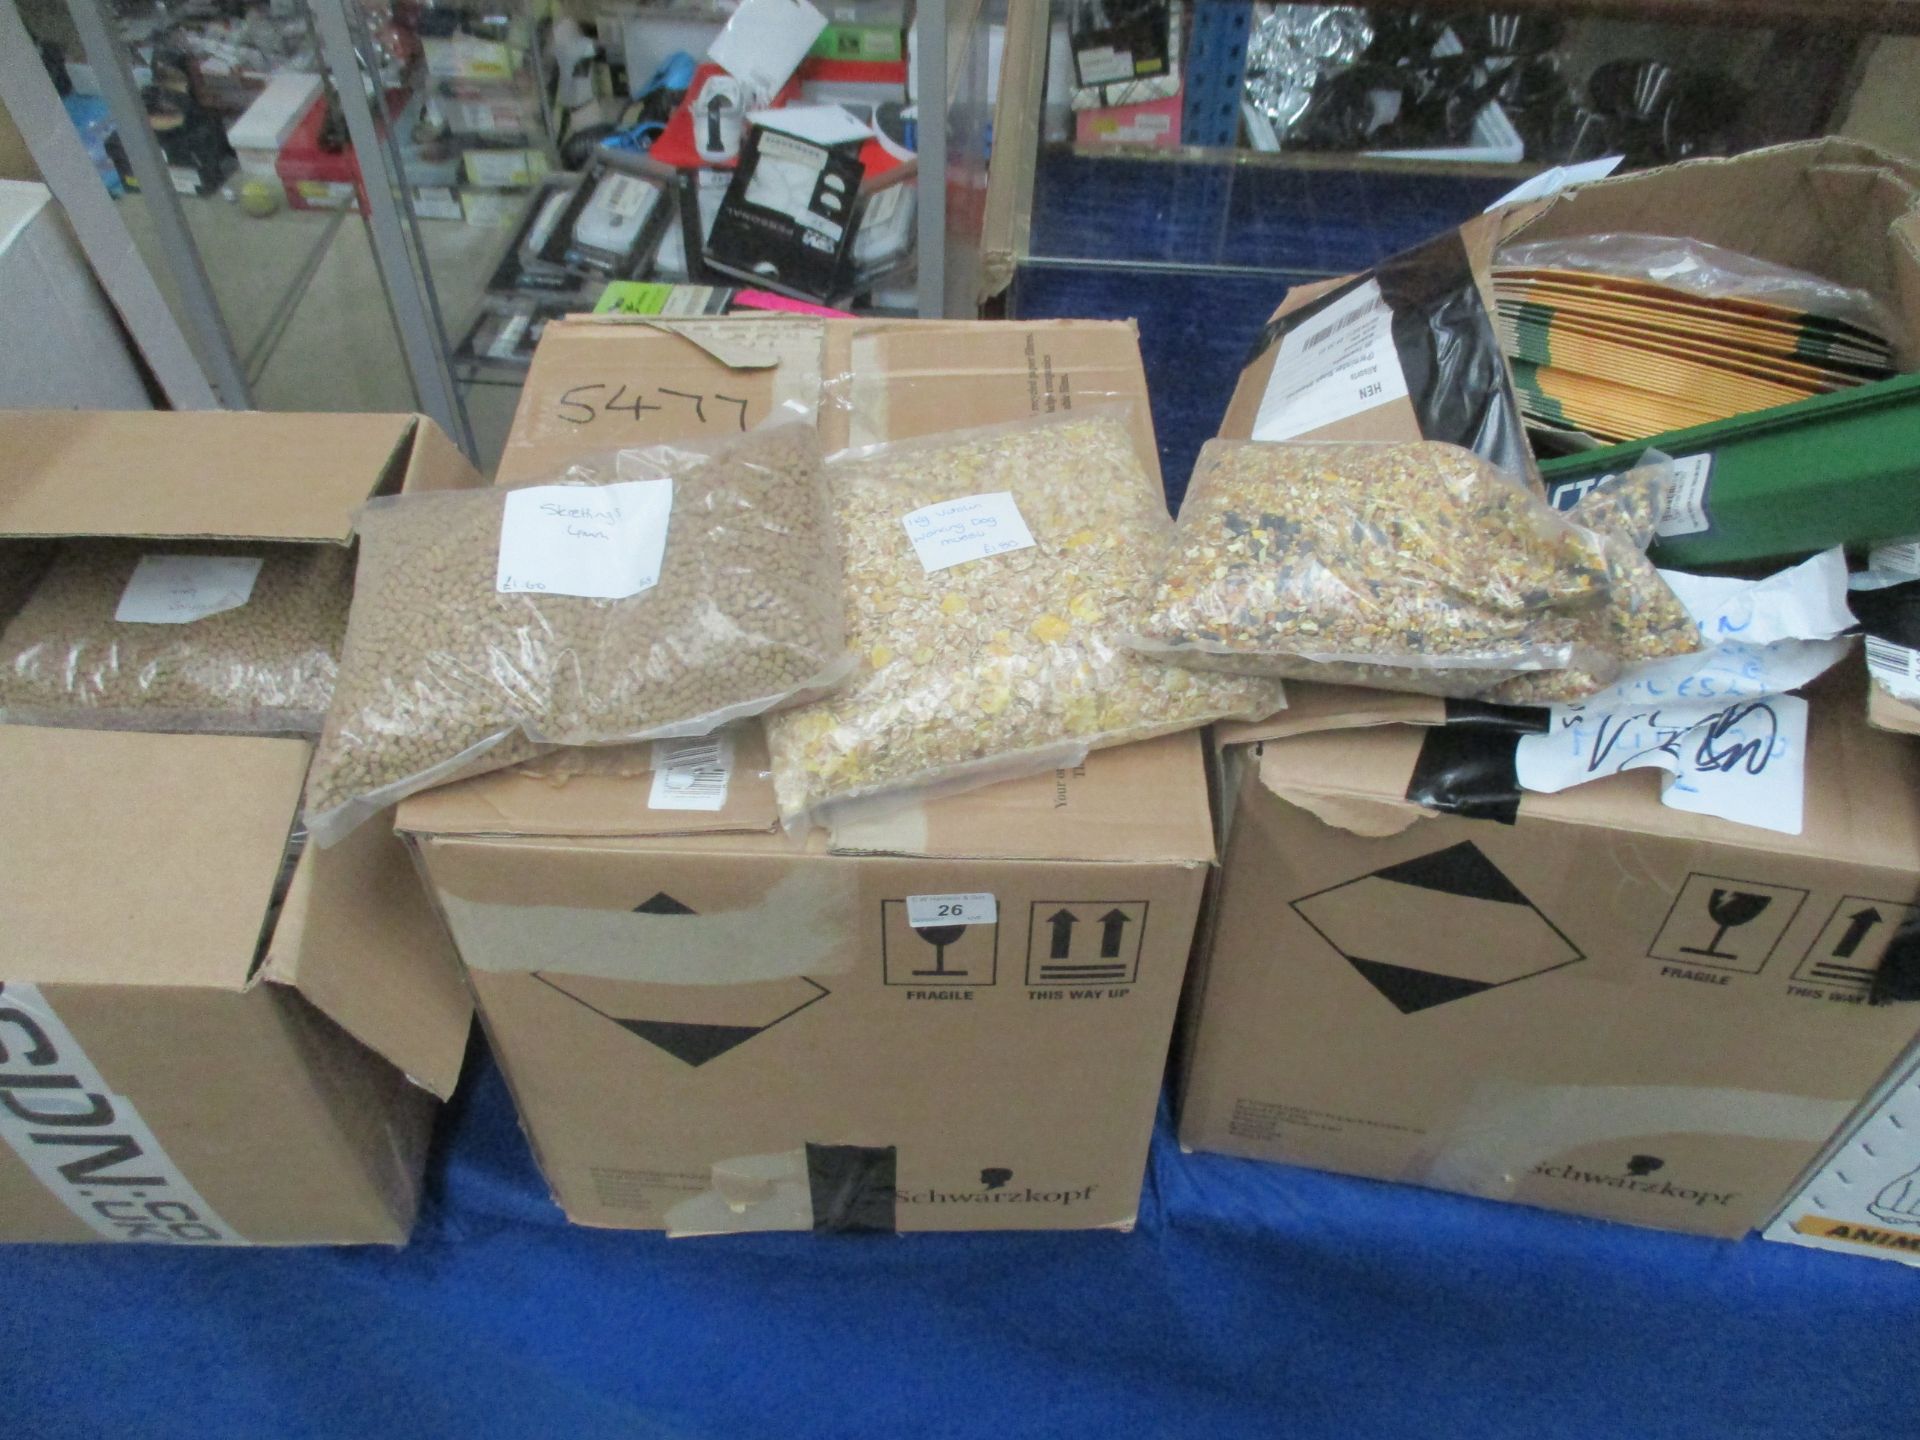 Contents to four boxes - bags of bird food,